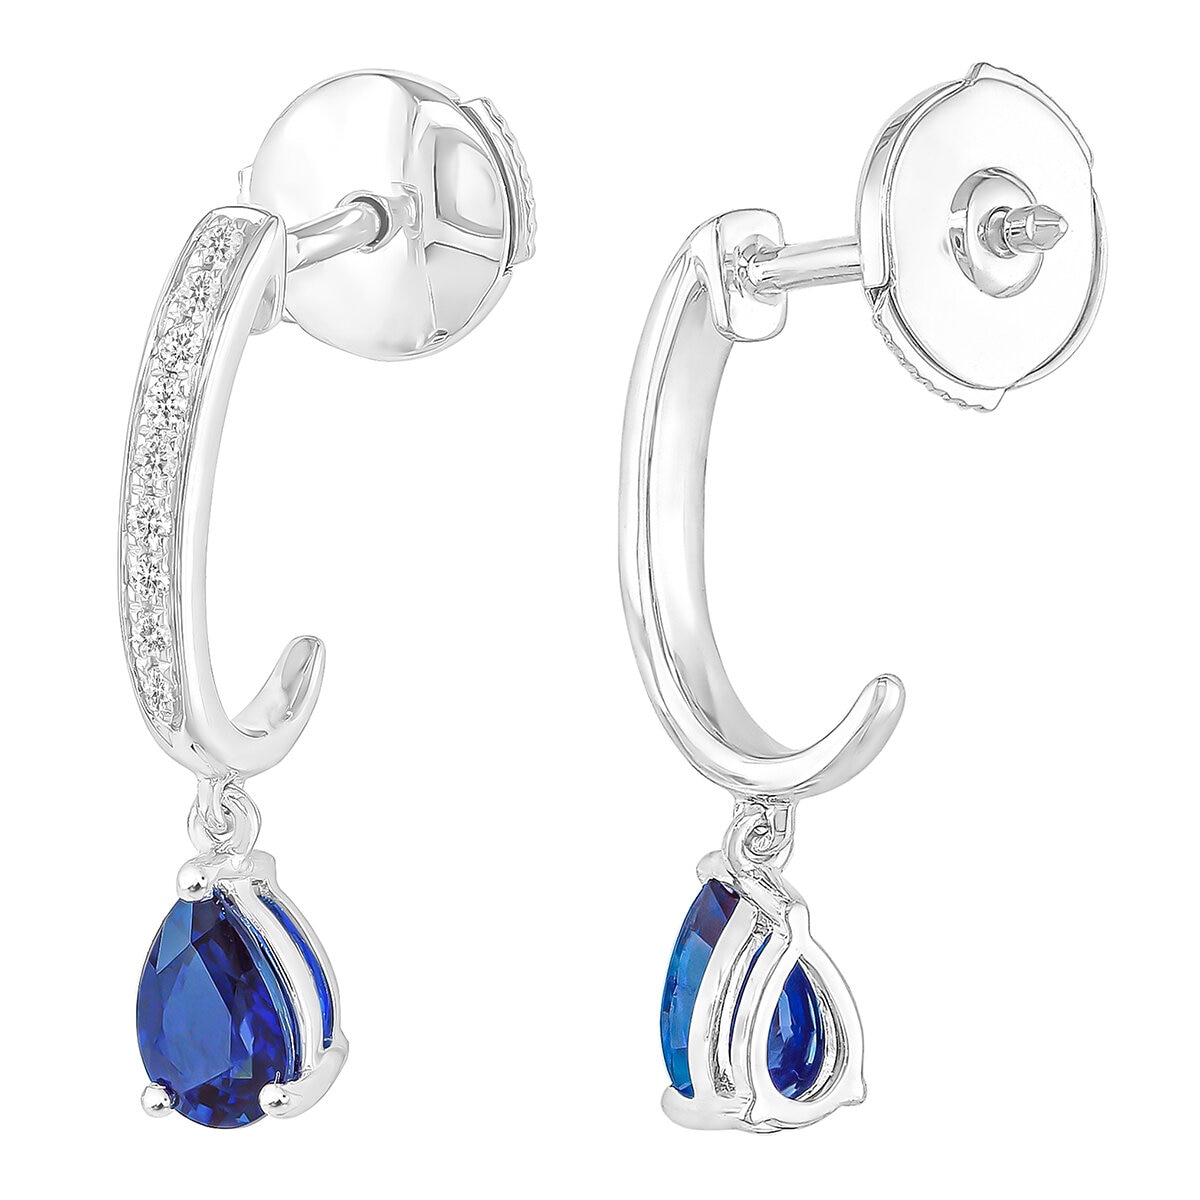 14KT White Gold 0.09ctw Diamond and Sapphire Earrings/